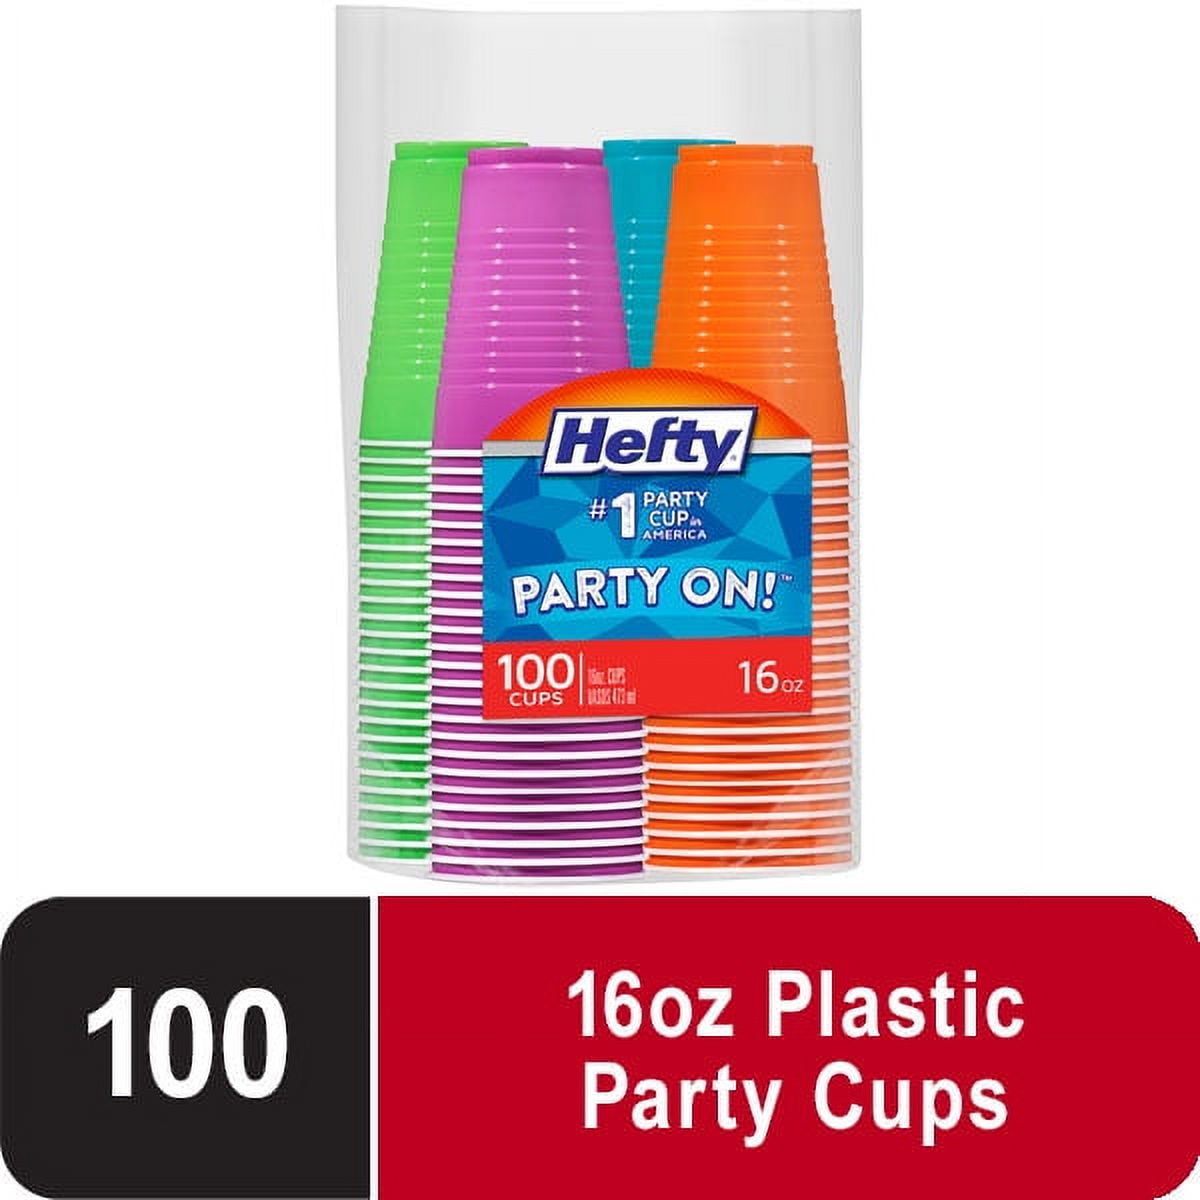 Hefty Party Perfect Cups, 18 Ounces - 28 cups